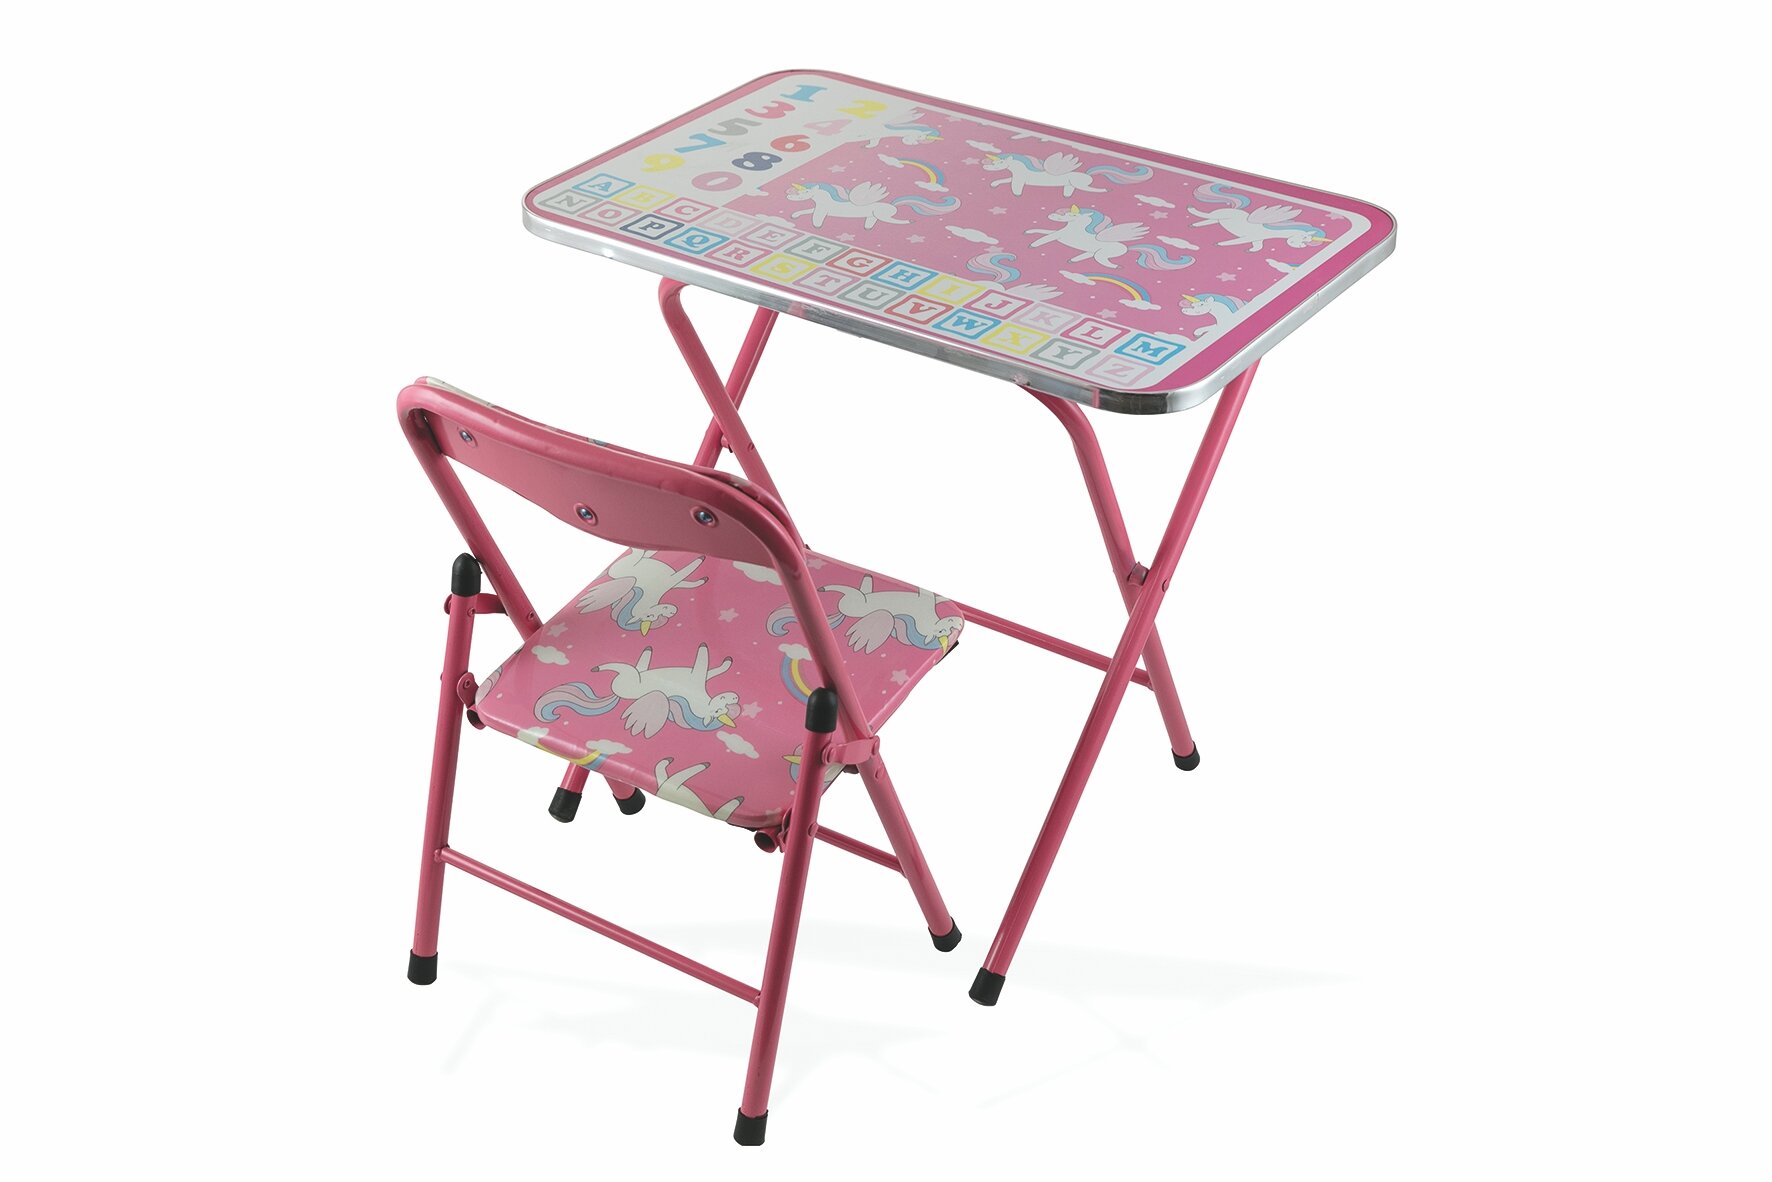 unicorn table for kids